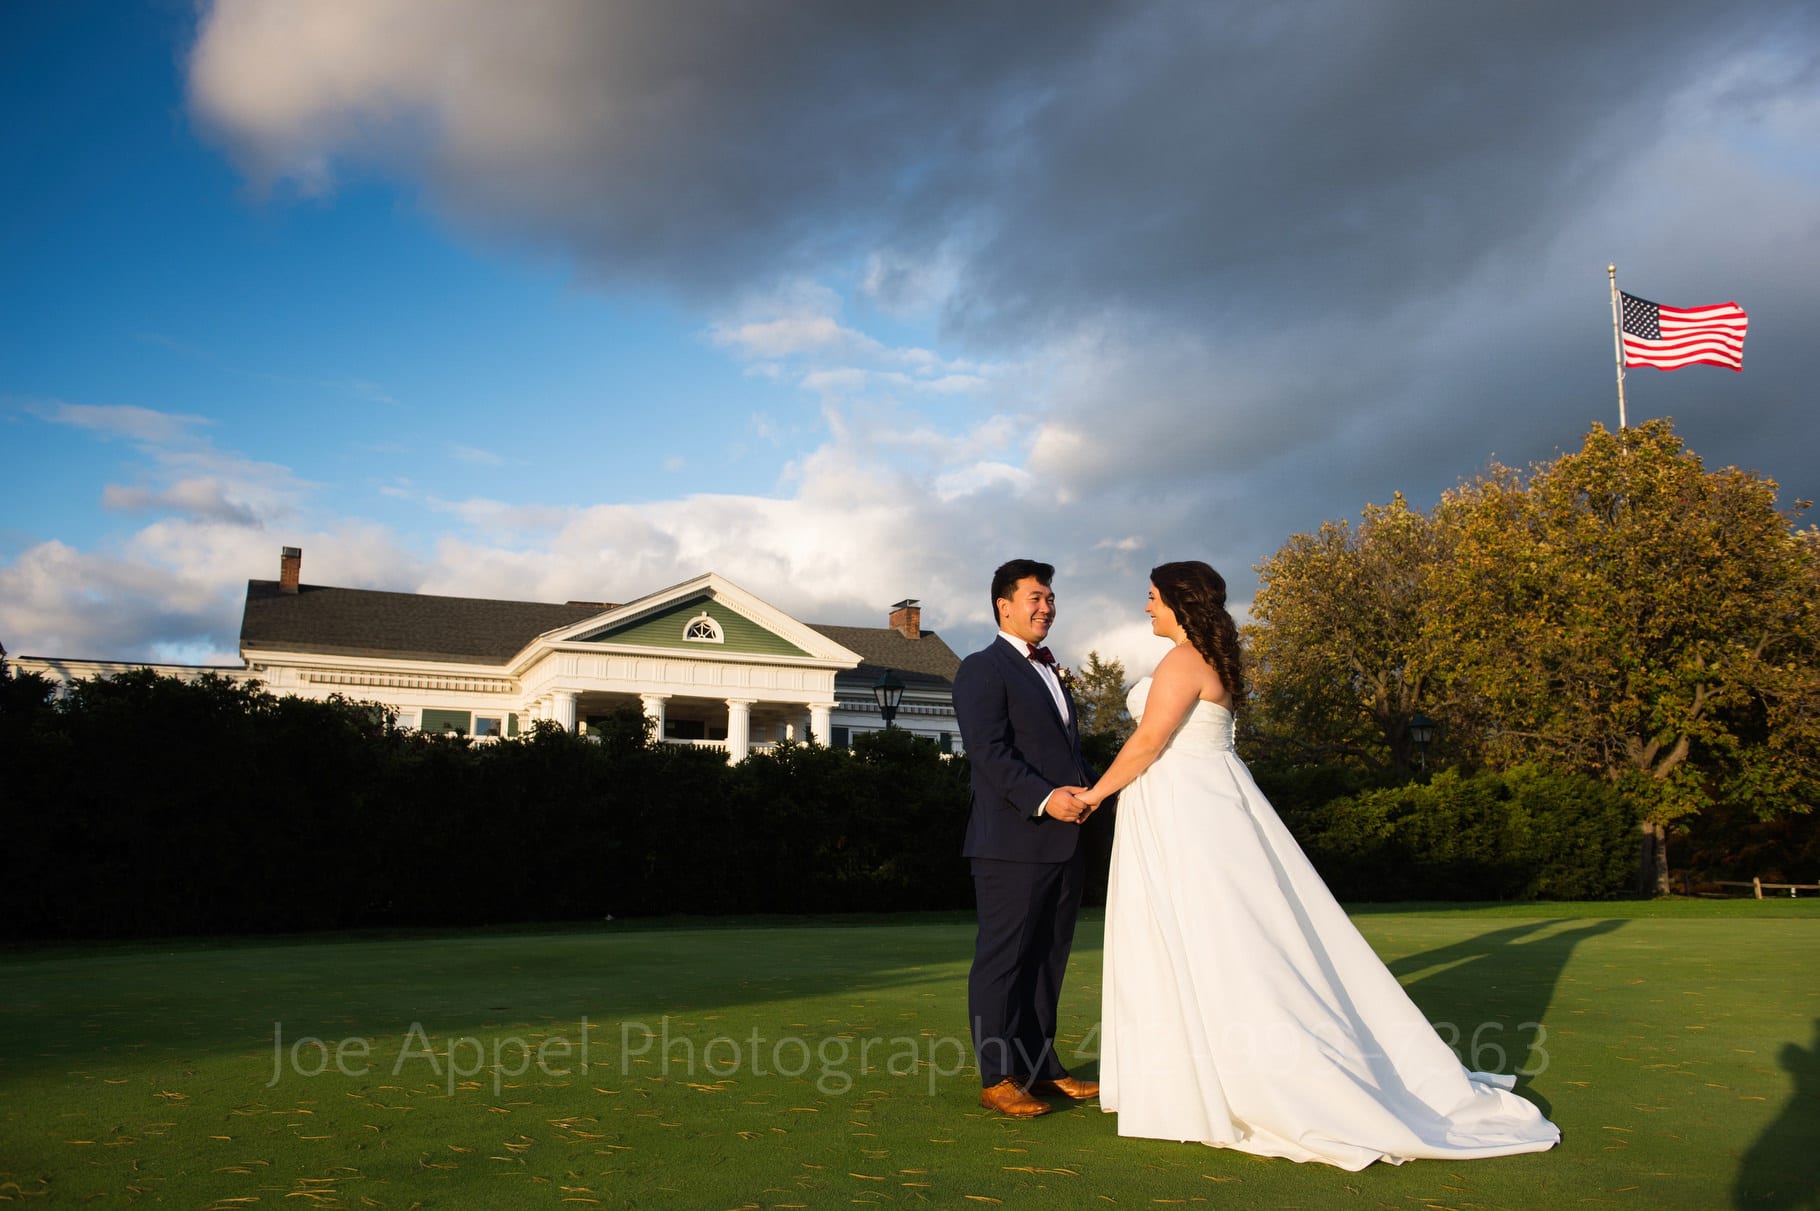 A bride and groom are lit by late afternoon sunlight in front of the Pittsburgh Golf Club. Puffy clouds float in the blue sky and the American flag flies in the right corner of the frame.